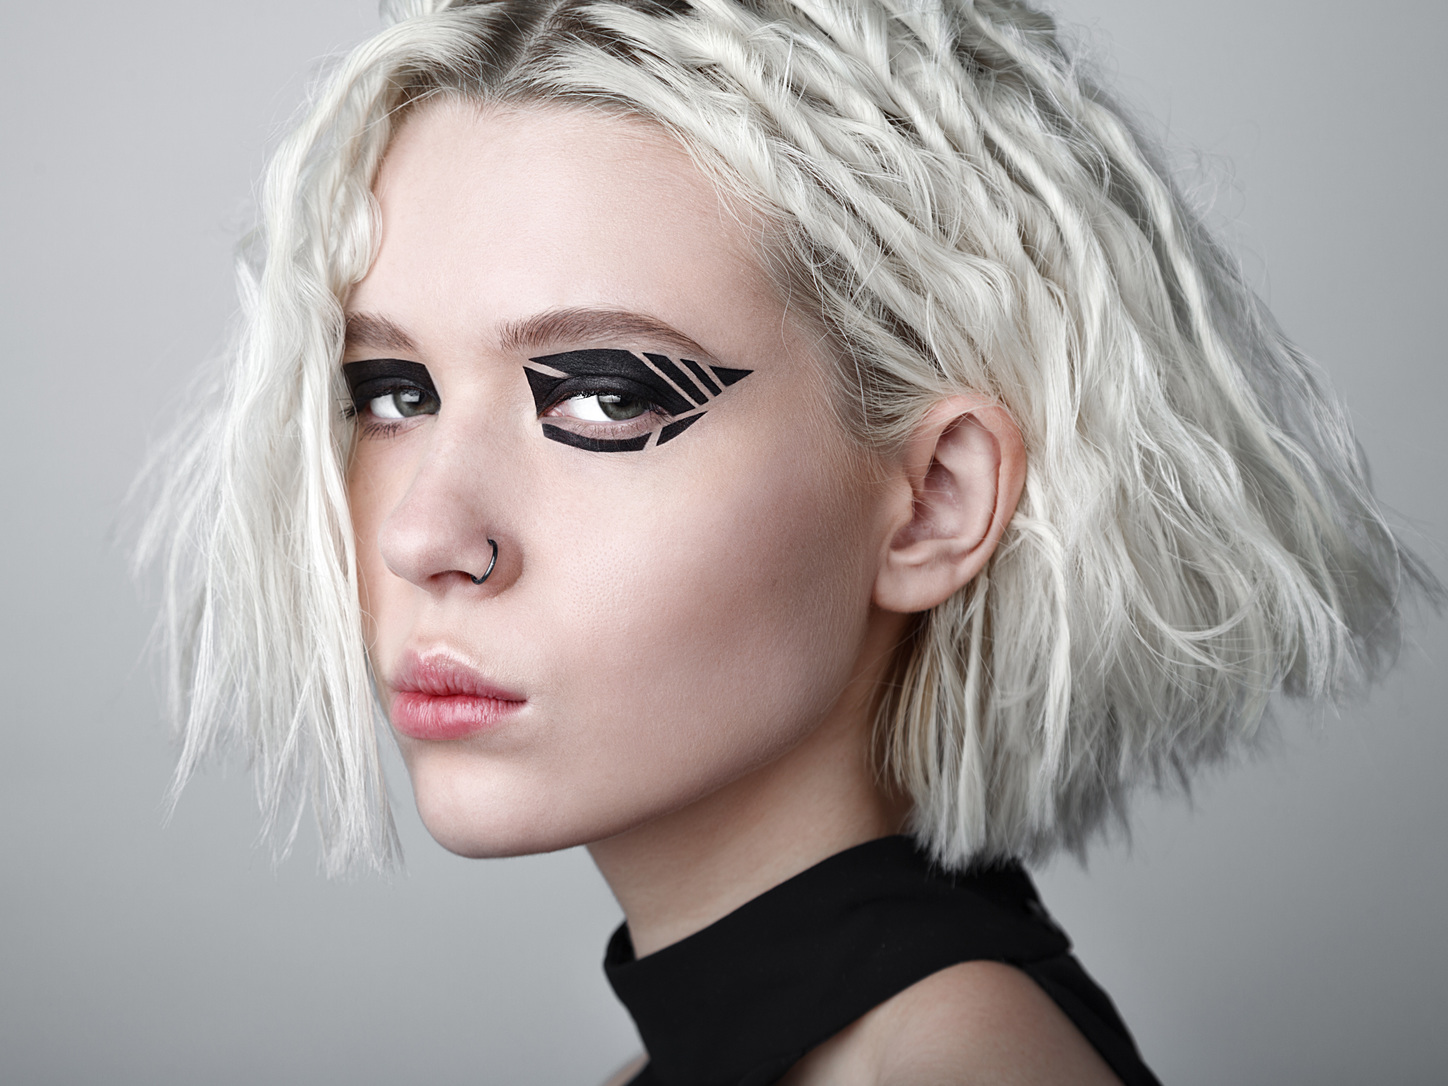 5 Creative Eye Makeup Trends From The